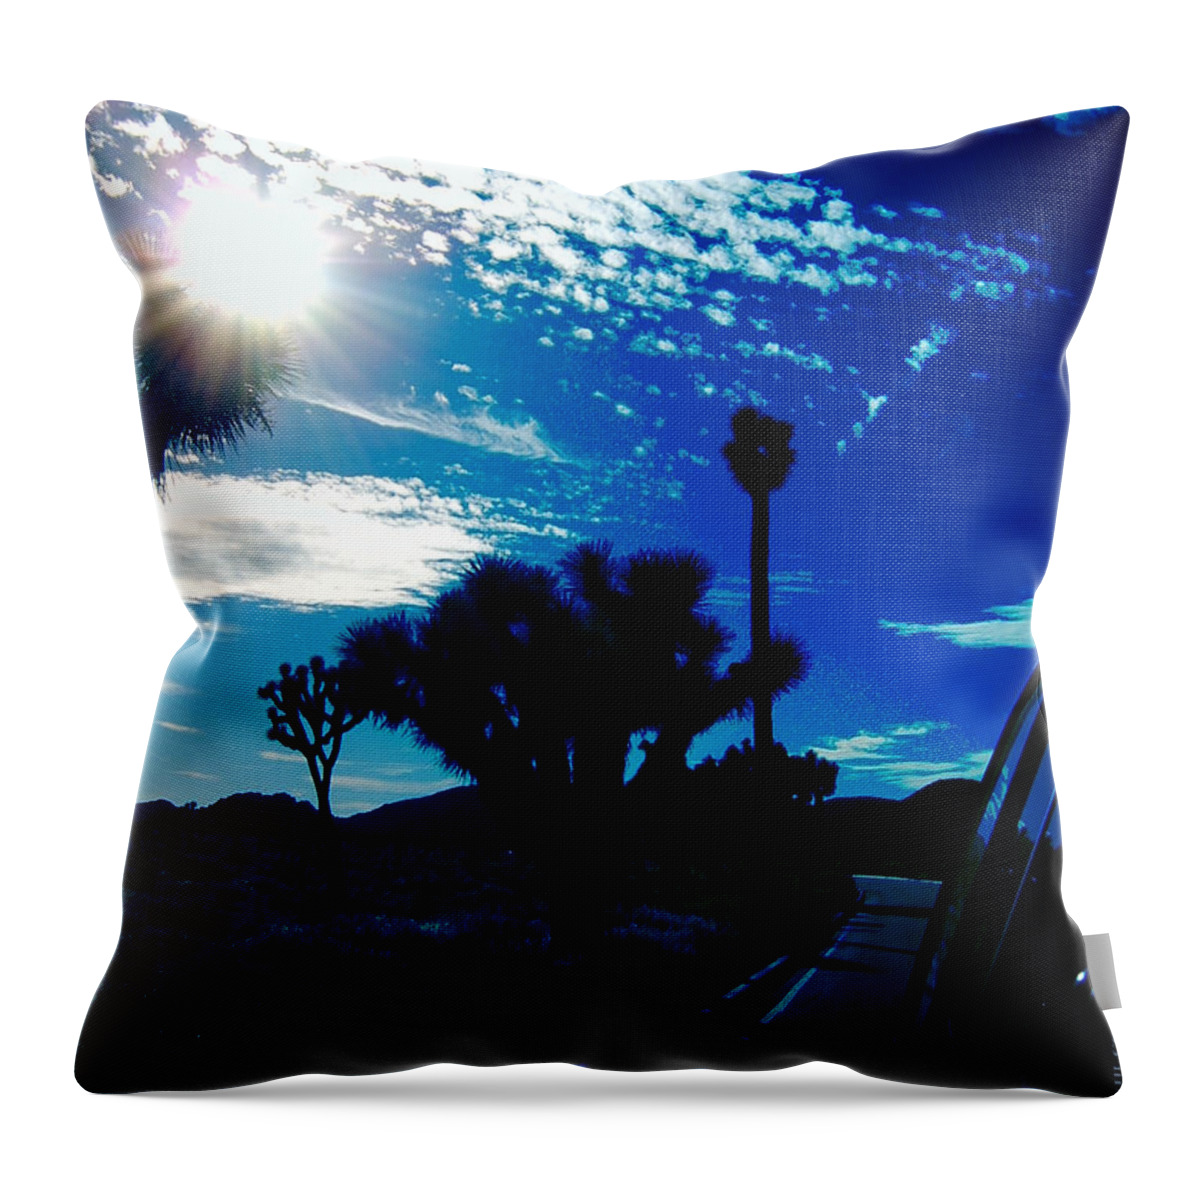 Landscape Throw Pillow featuring the photograph Joshua Tree by Tony Koehl